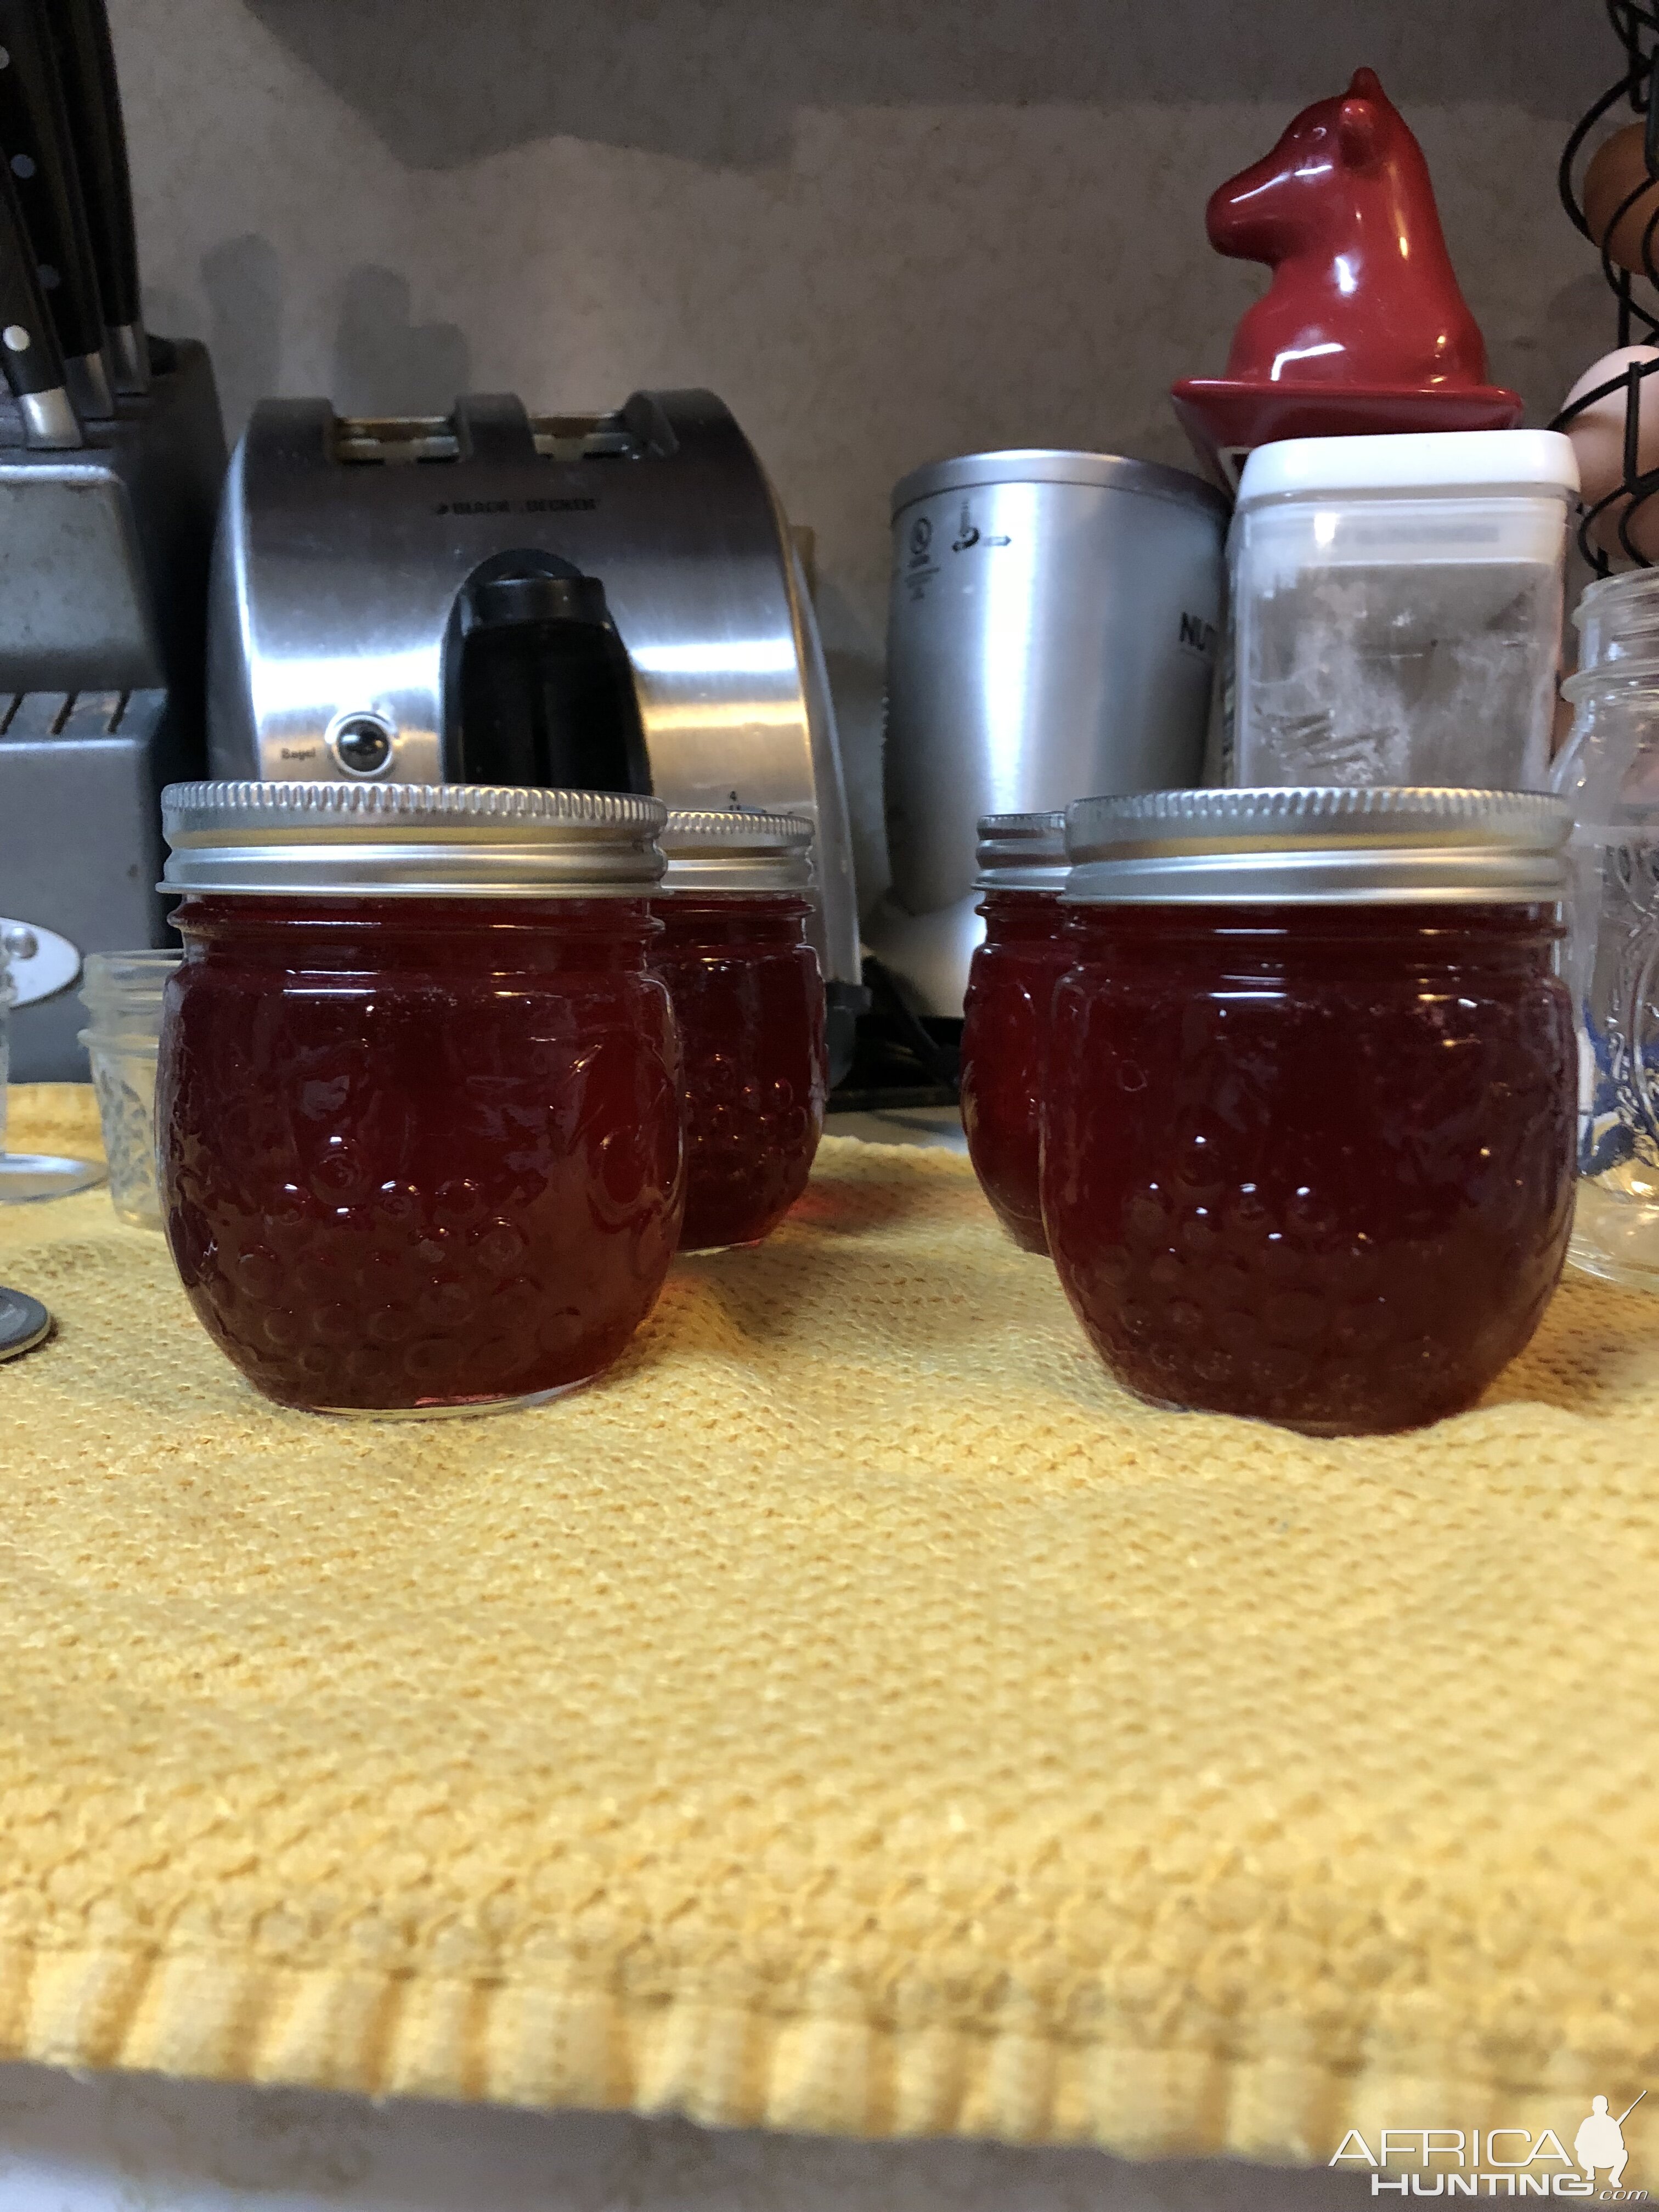 Prickly pear jelly